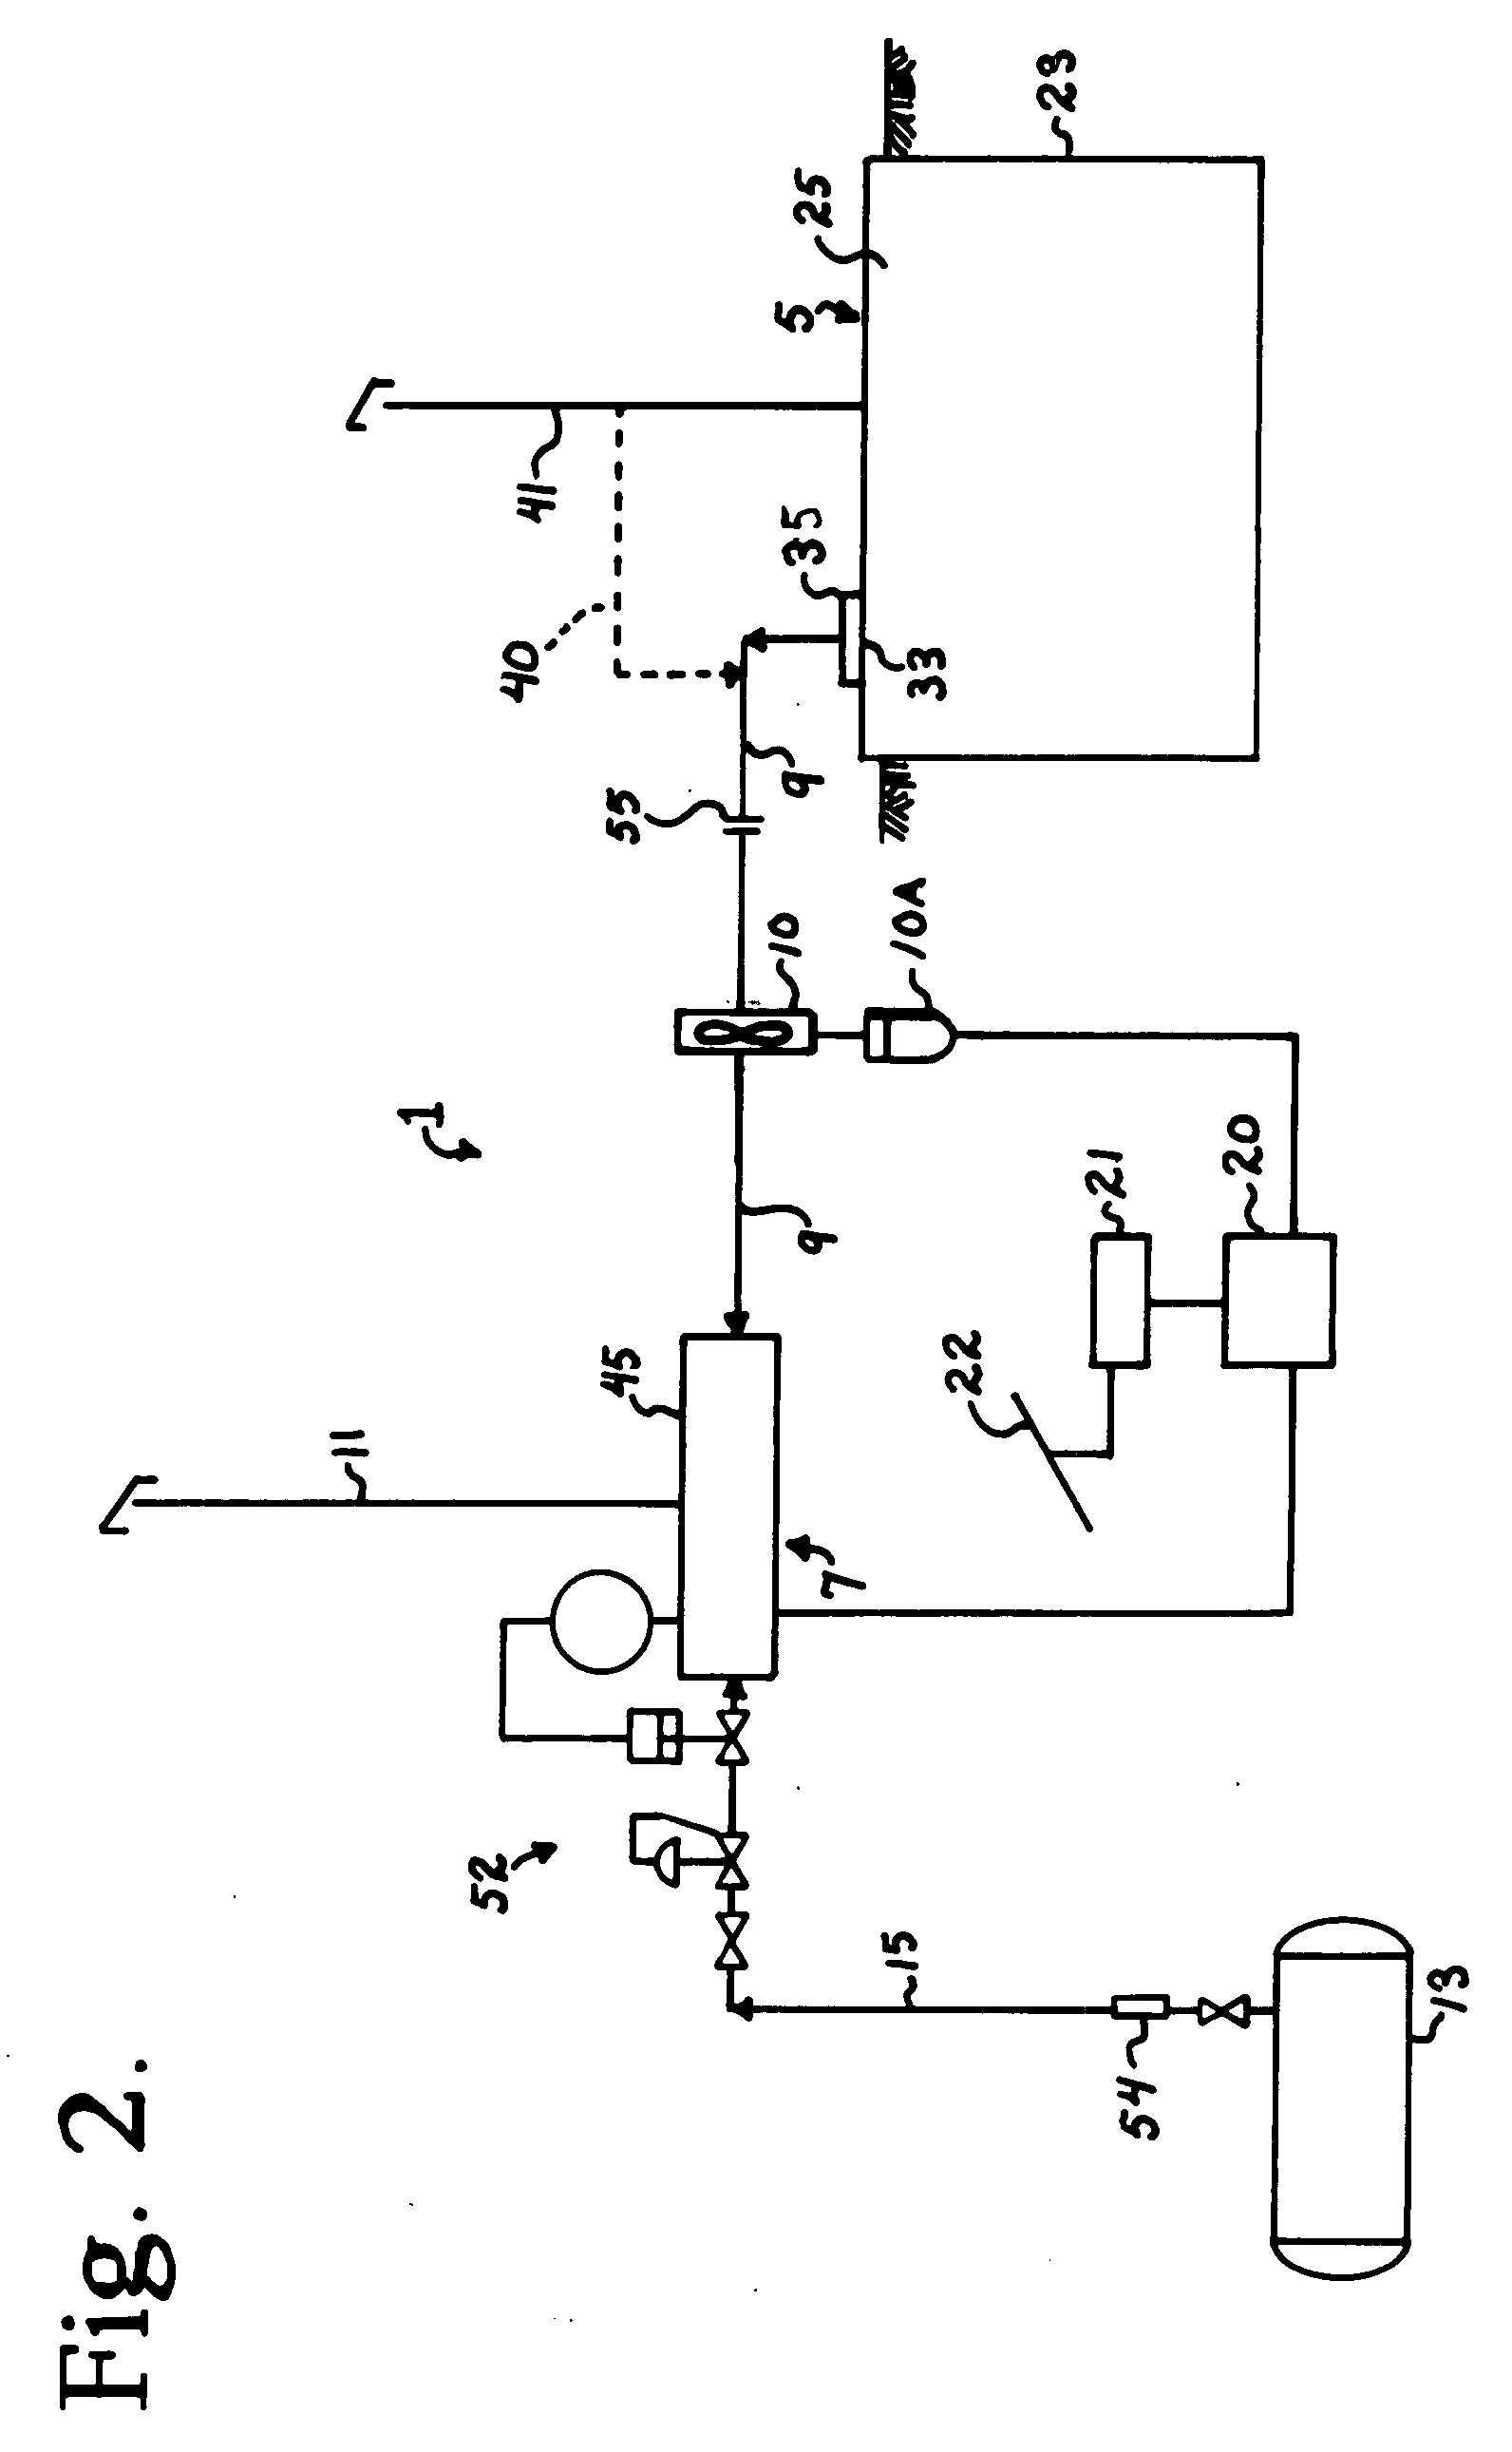 Method and apparatus for controlling fecal odors